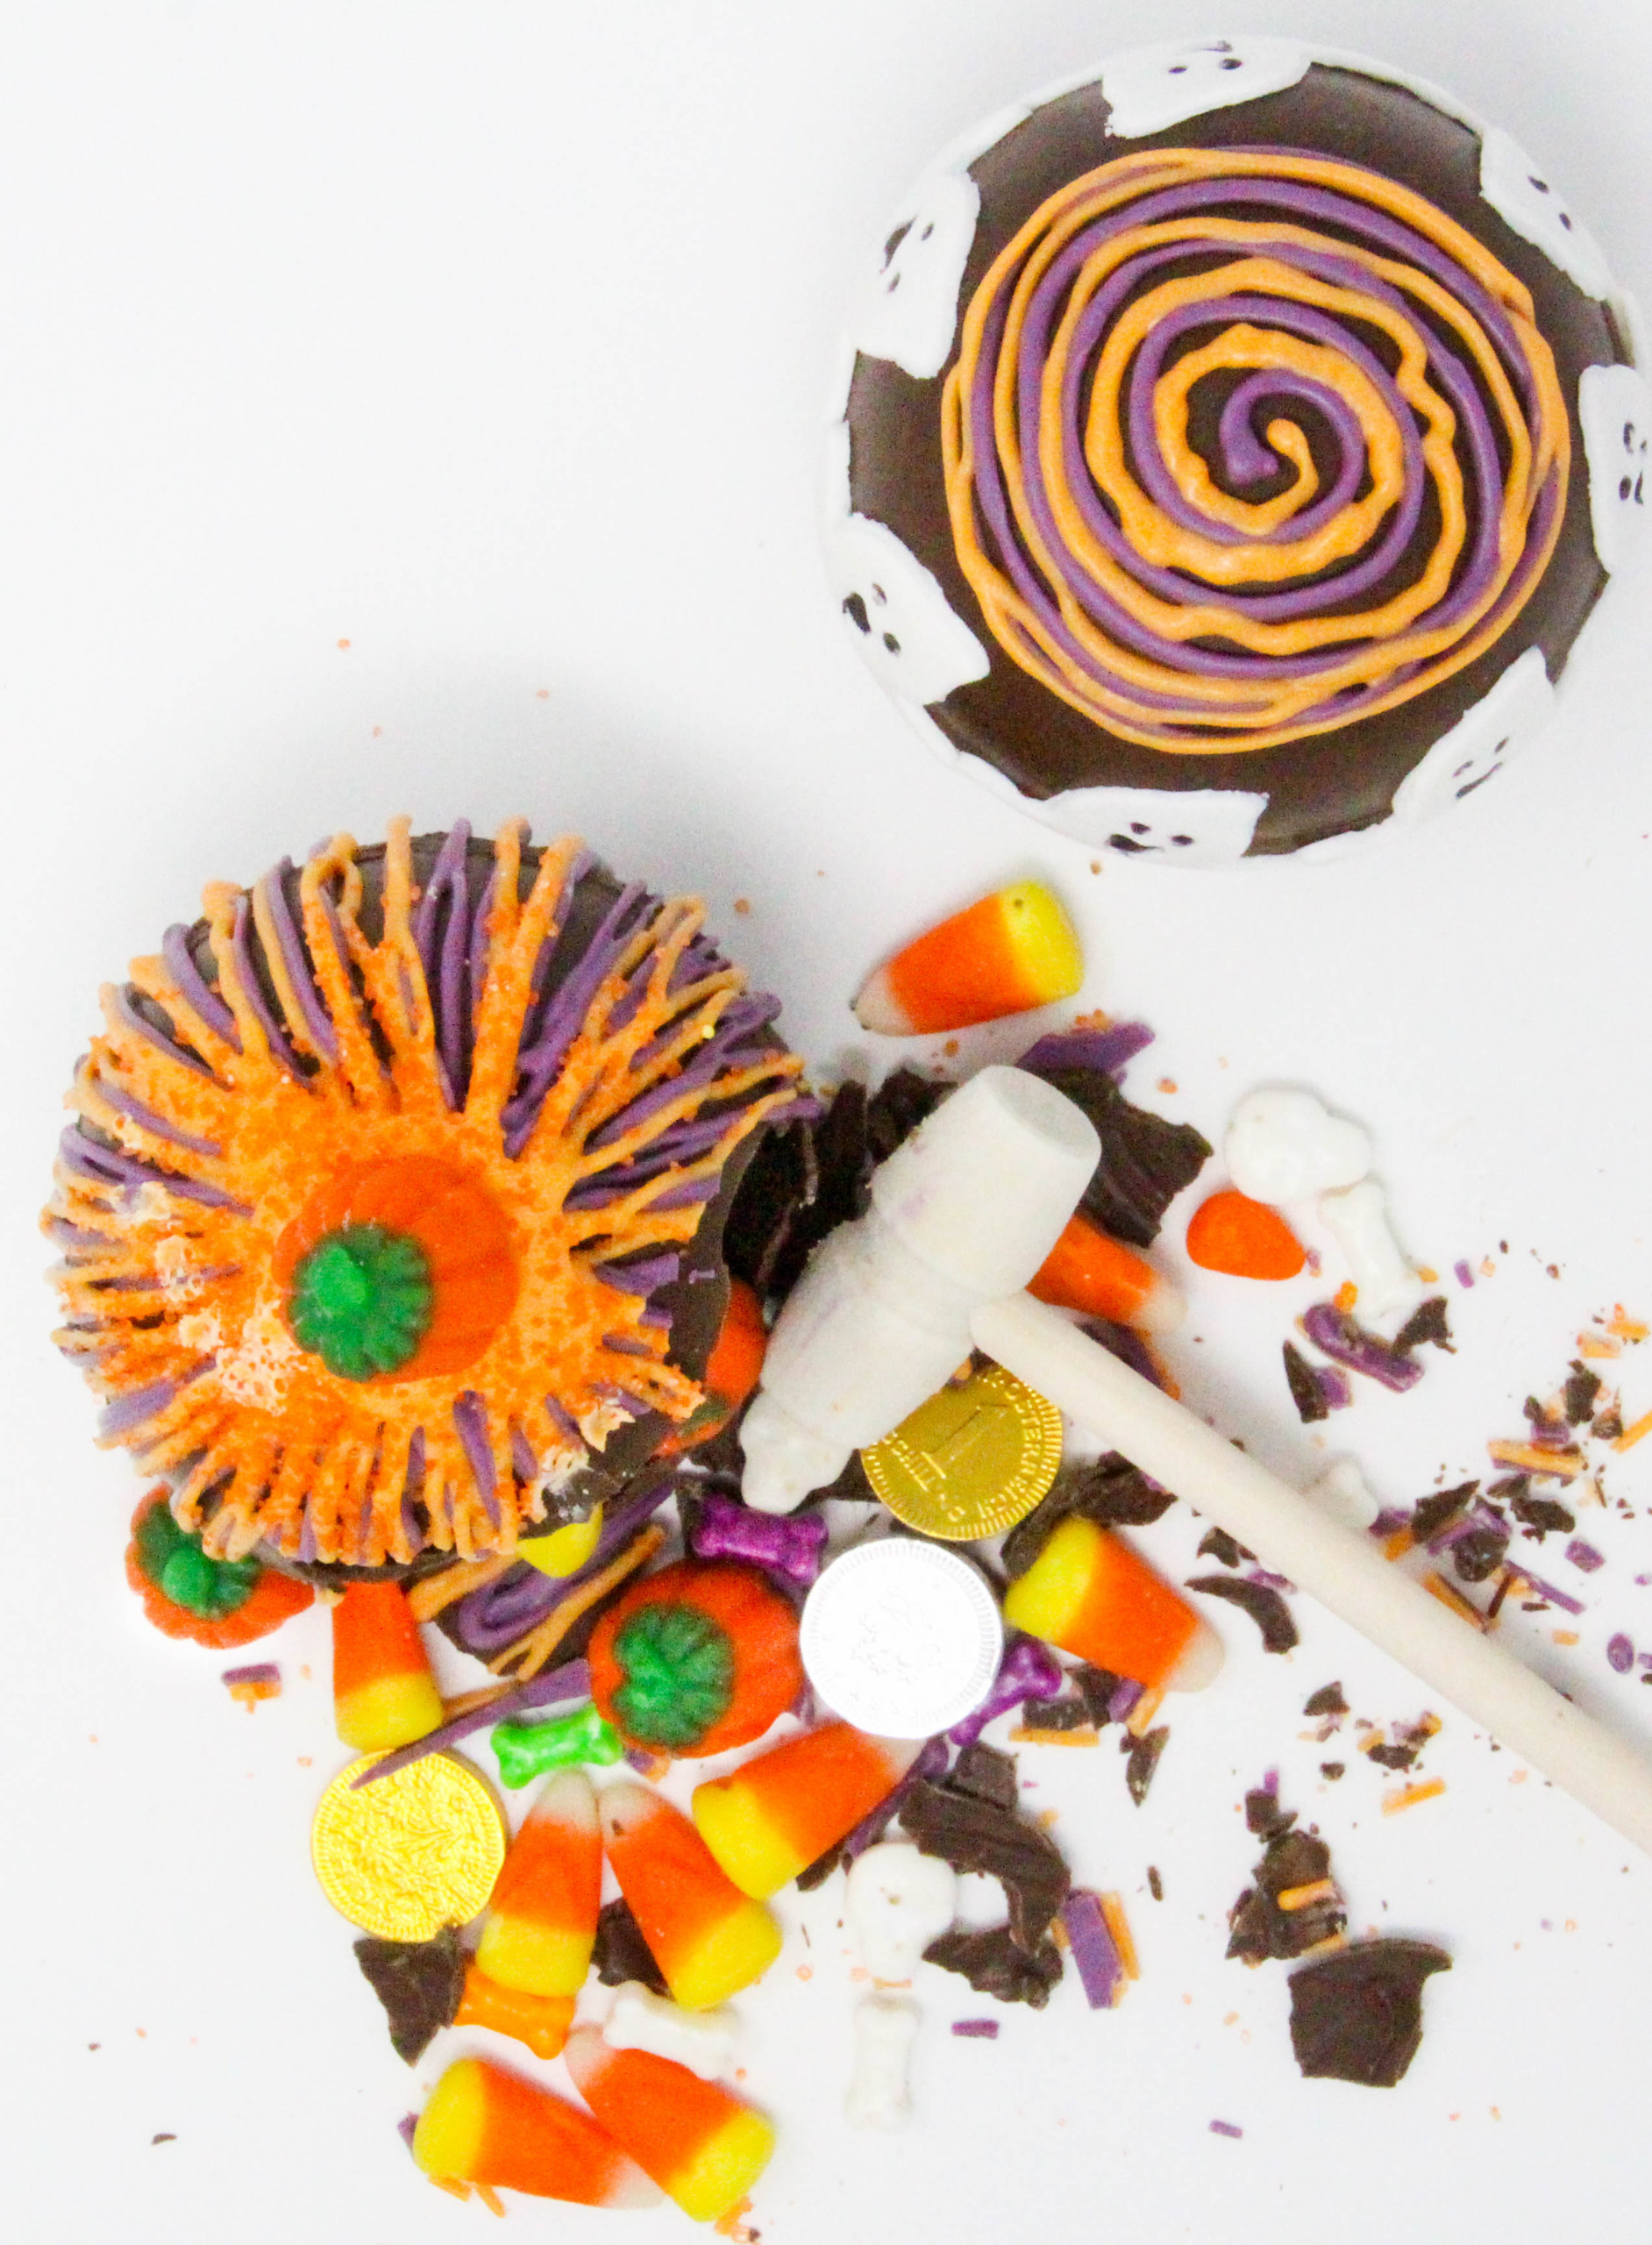 With easy to use candy melts, these fun chocolate smash bombs can be decorated and filled with colors and candies to fit any holiday or theme! Recipe created by Cinnamon & Sugar for Catherine Bruns, author of DESSERT IS THE BOMB. 